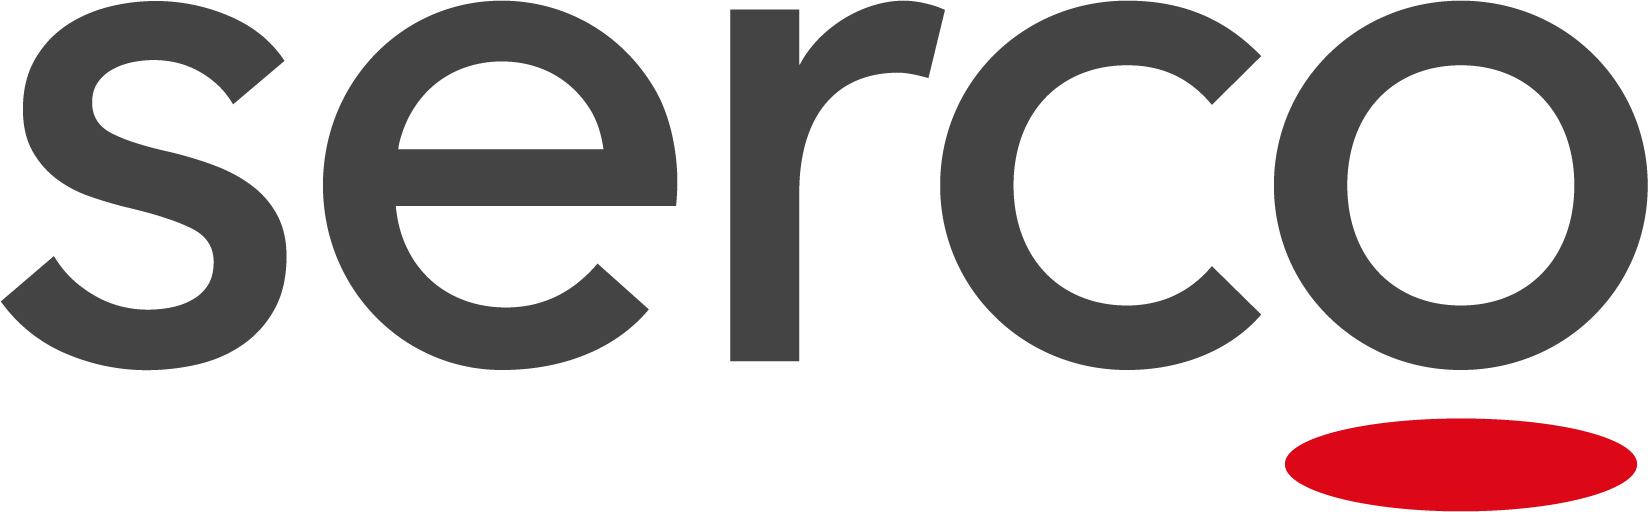 Serco NEW logo - Coloured [Converted].png